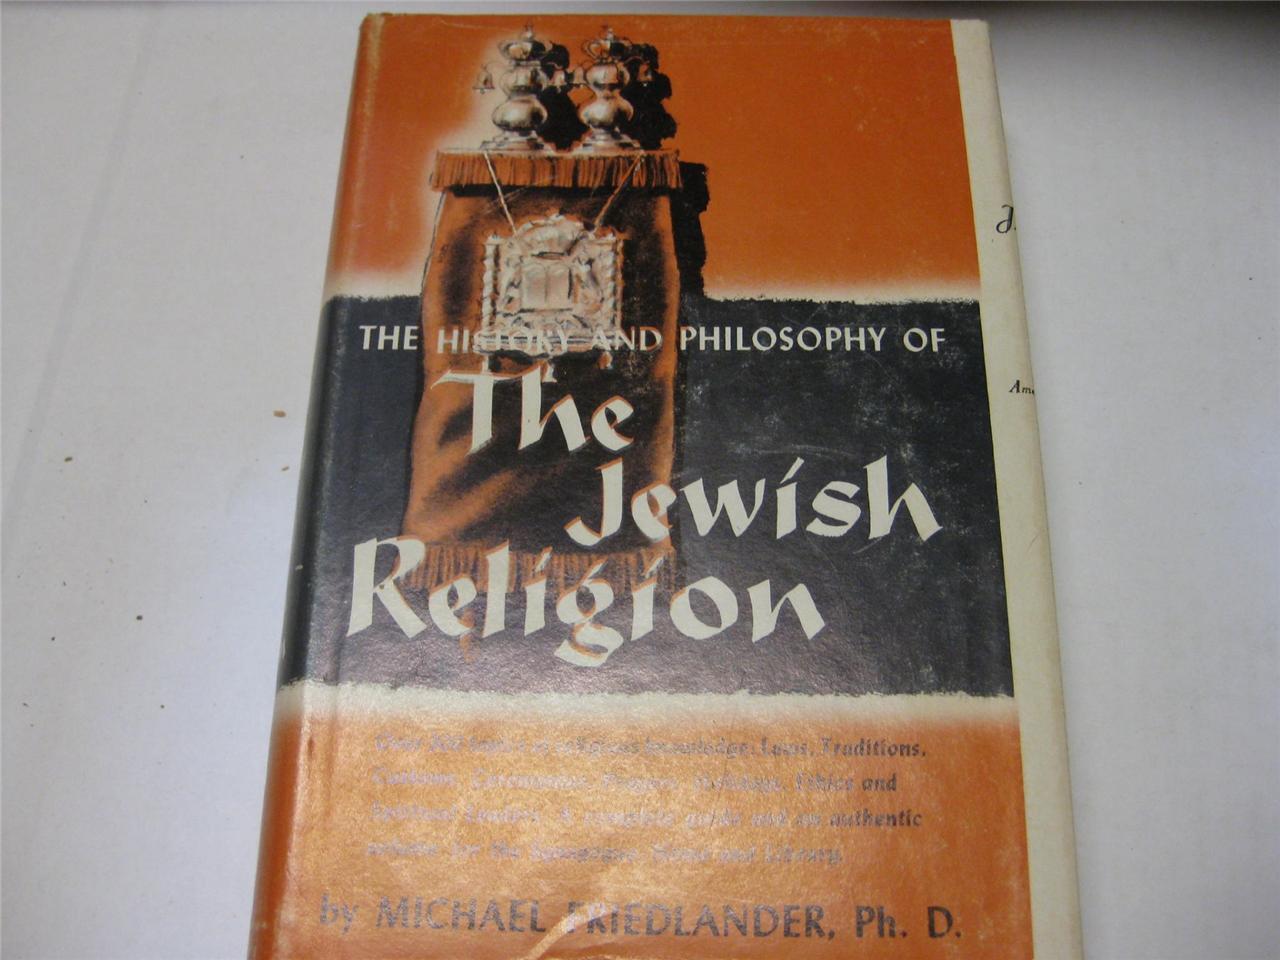 The History and Philosophy of The Jewish Religion by Michael Friedlander